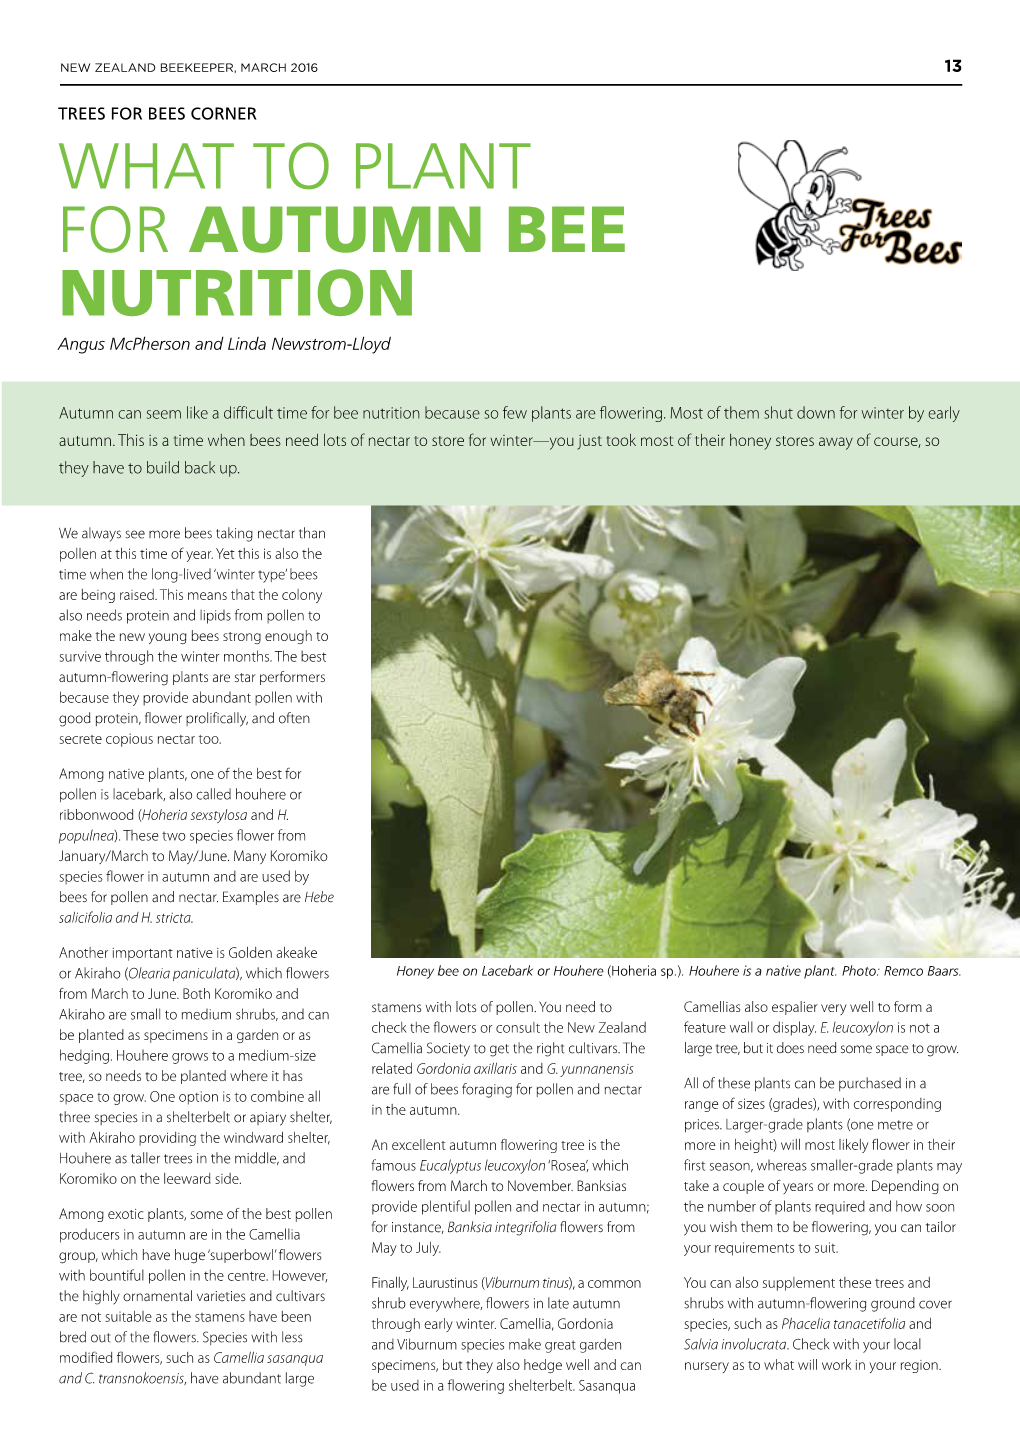 What to Plant for Autumn Bee Nutrition. NZ Beekeeper Trees for Bees Corner